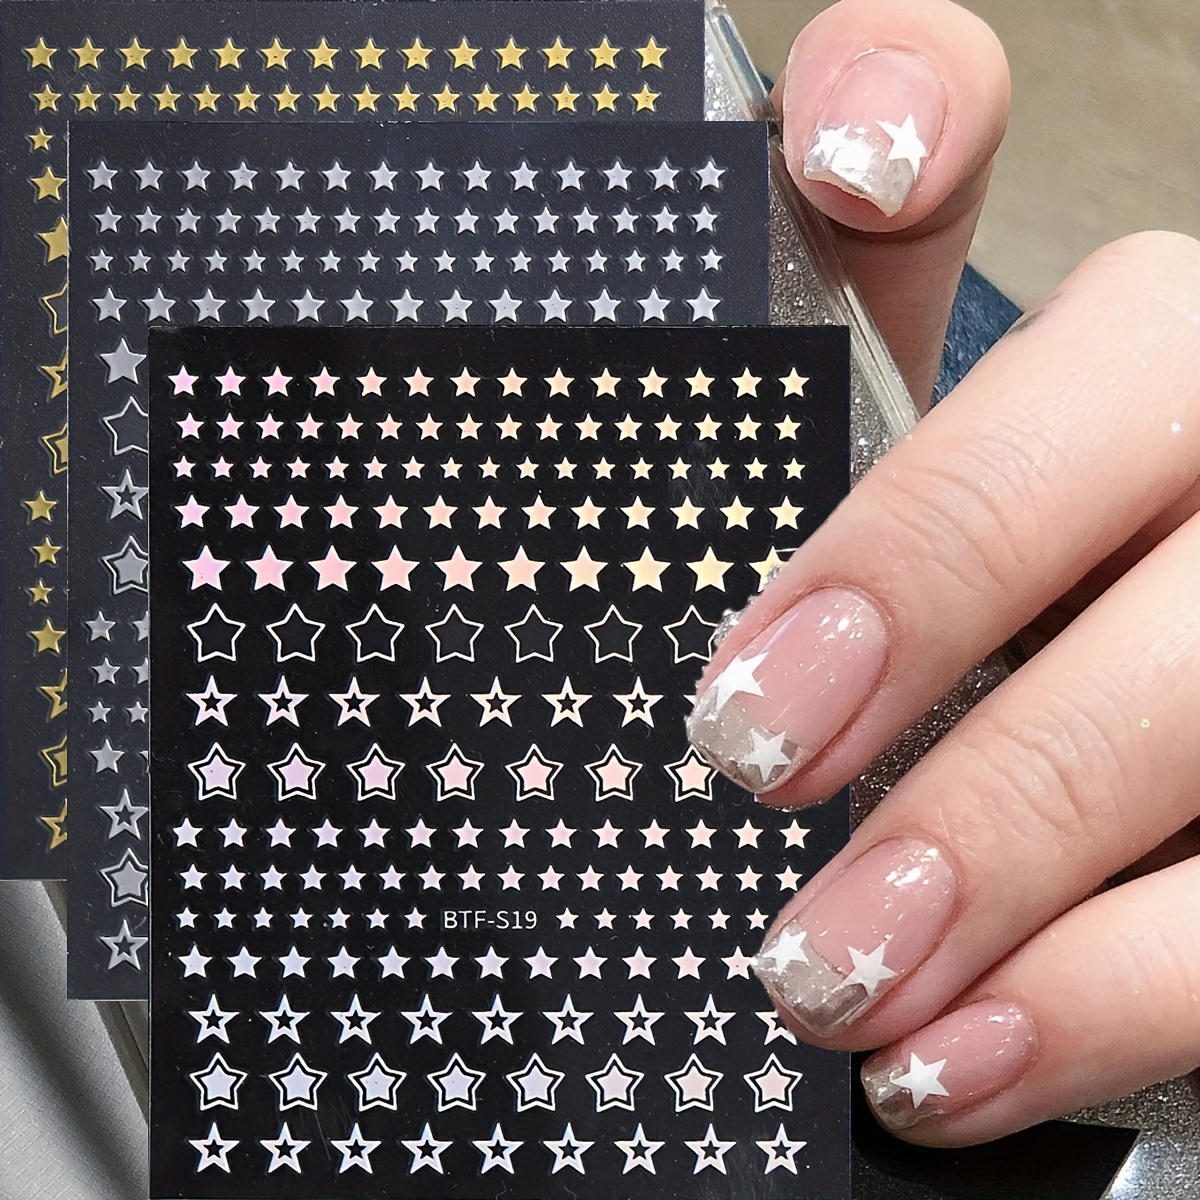  Gold Nail Foil Transfer Stickers Nail Art Supplies Holographic  Laser Star Moon Flower Heart Abstract Face Designer Nail Stickers 3D  Glitter Line DIY Design Manicure Accessories Decoration 16 Sheets : Beauty